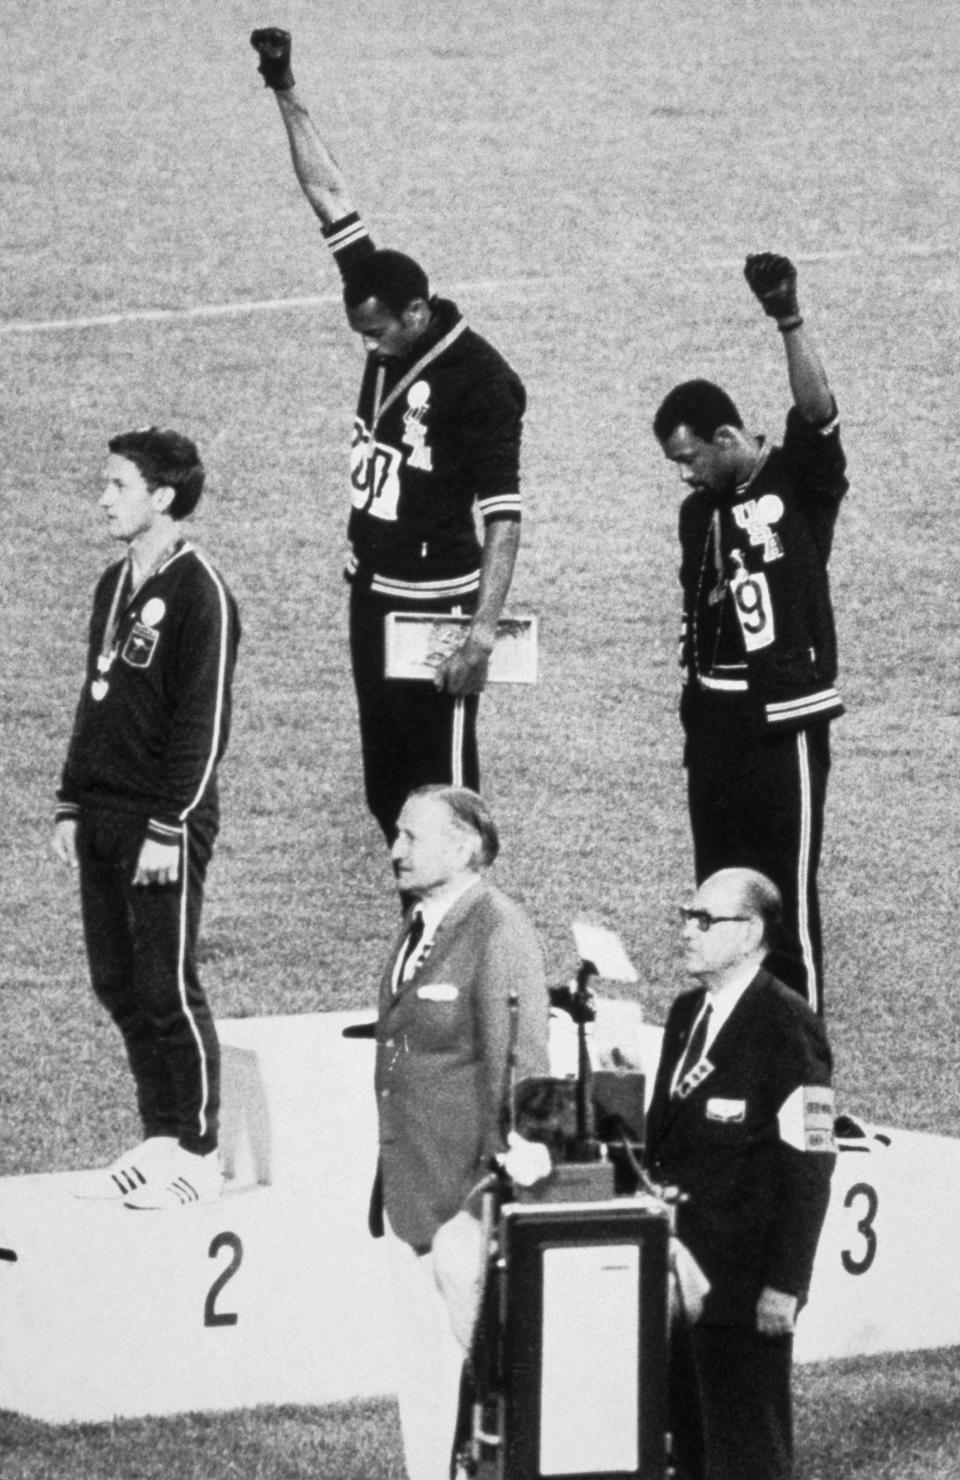 American sprinters Tommie Smith and John Carlos raise their fists in the Black Power salute on the podium at the 1968 Olympic Games in Mexico City.